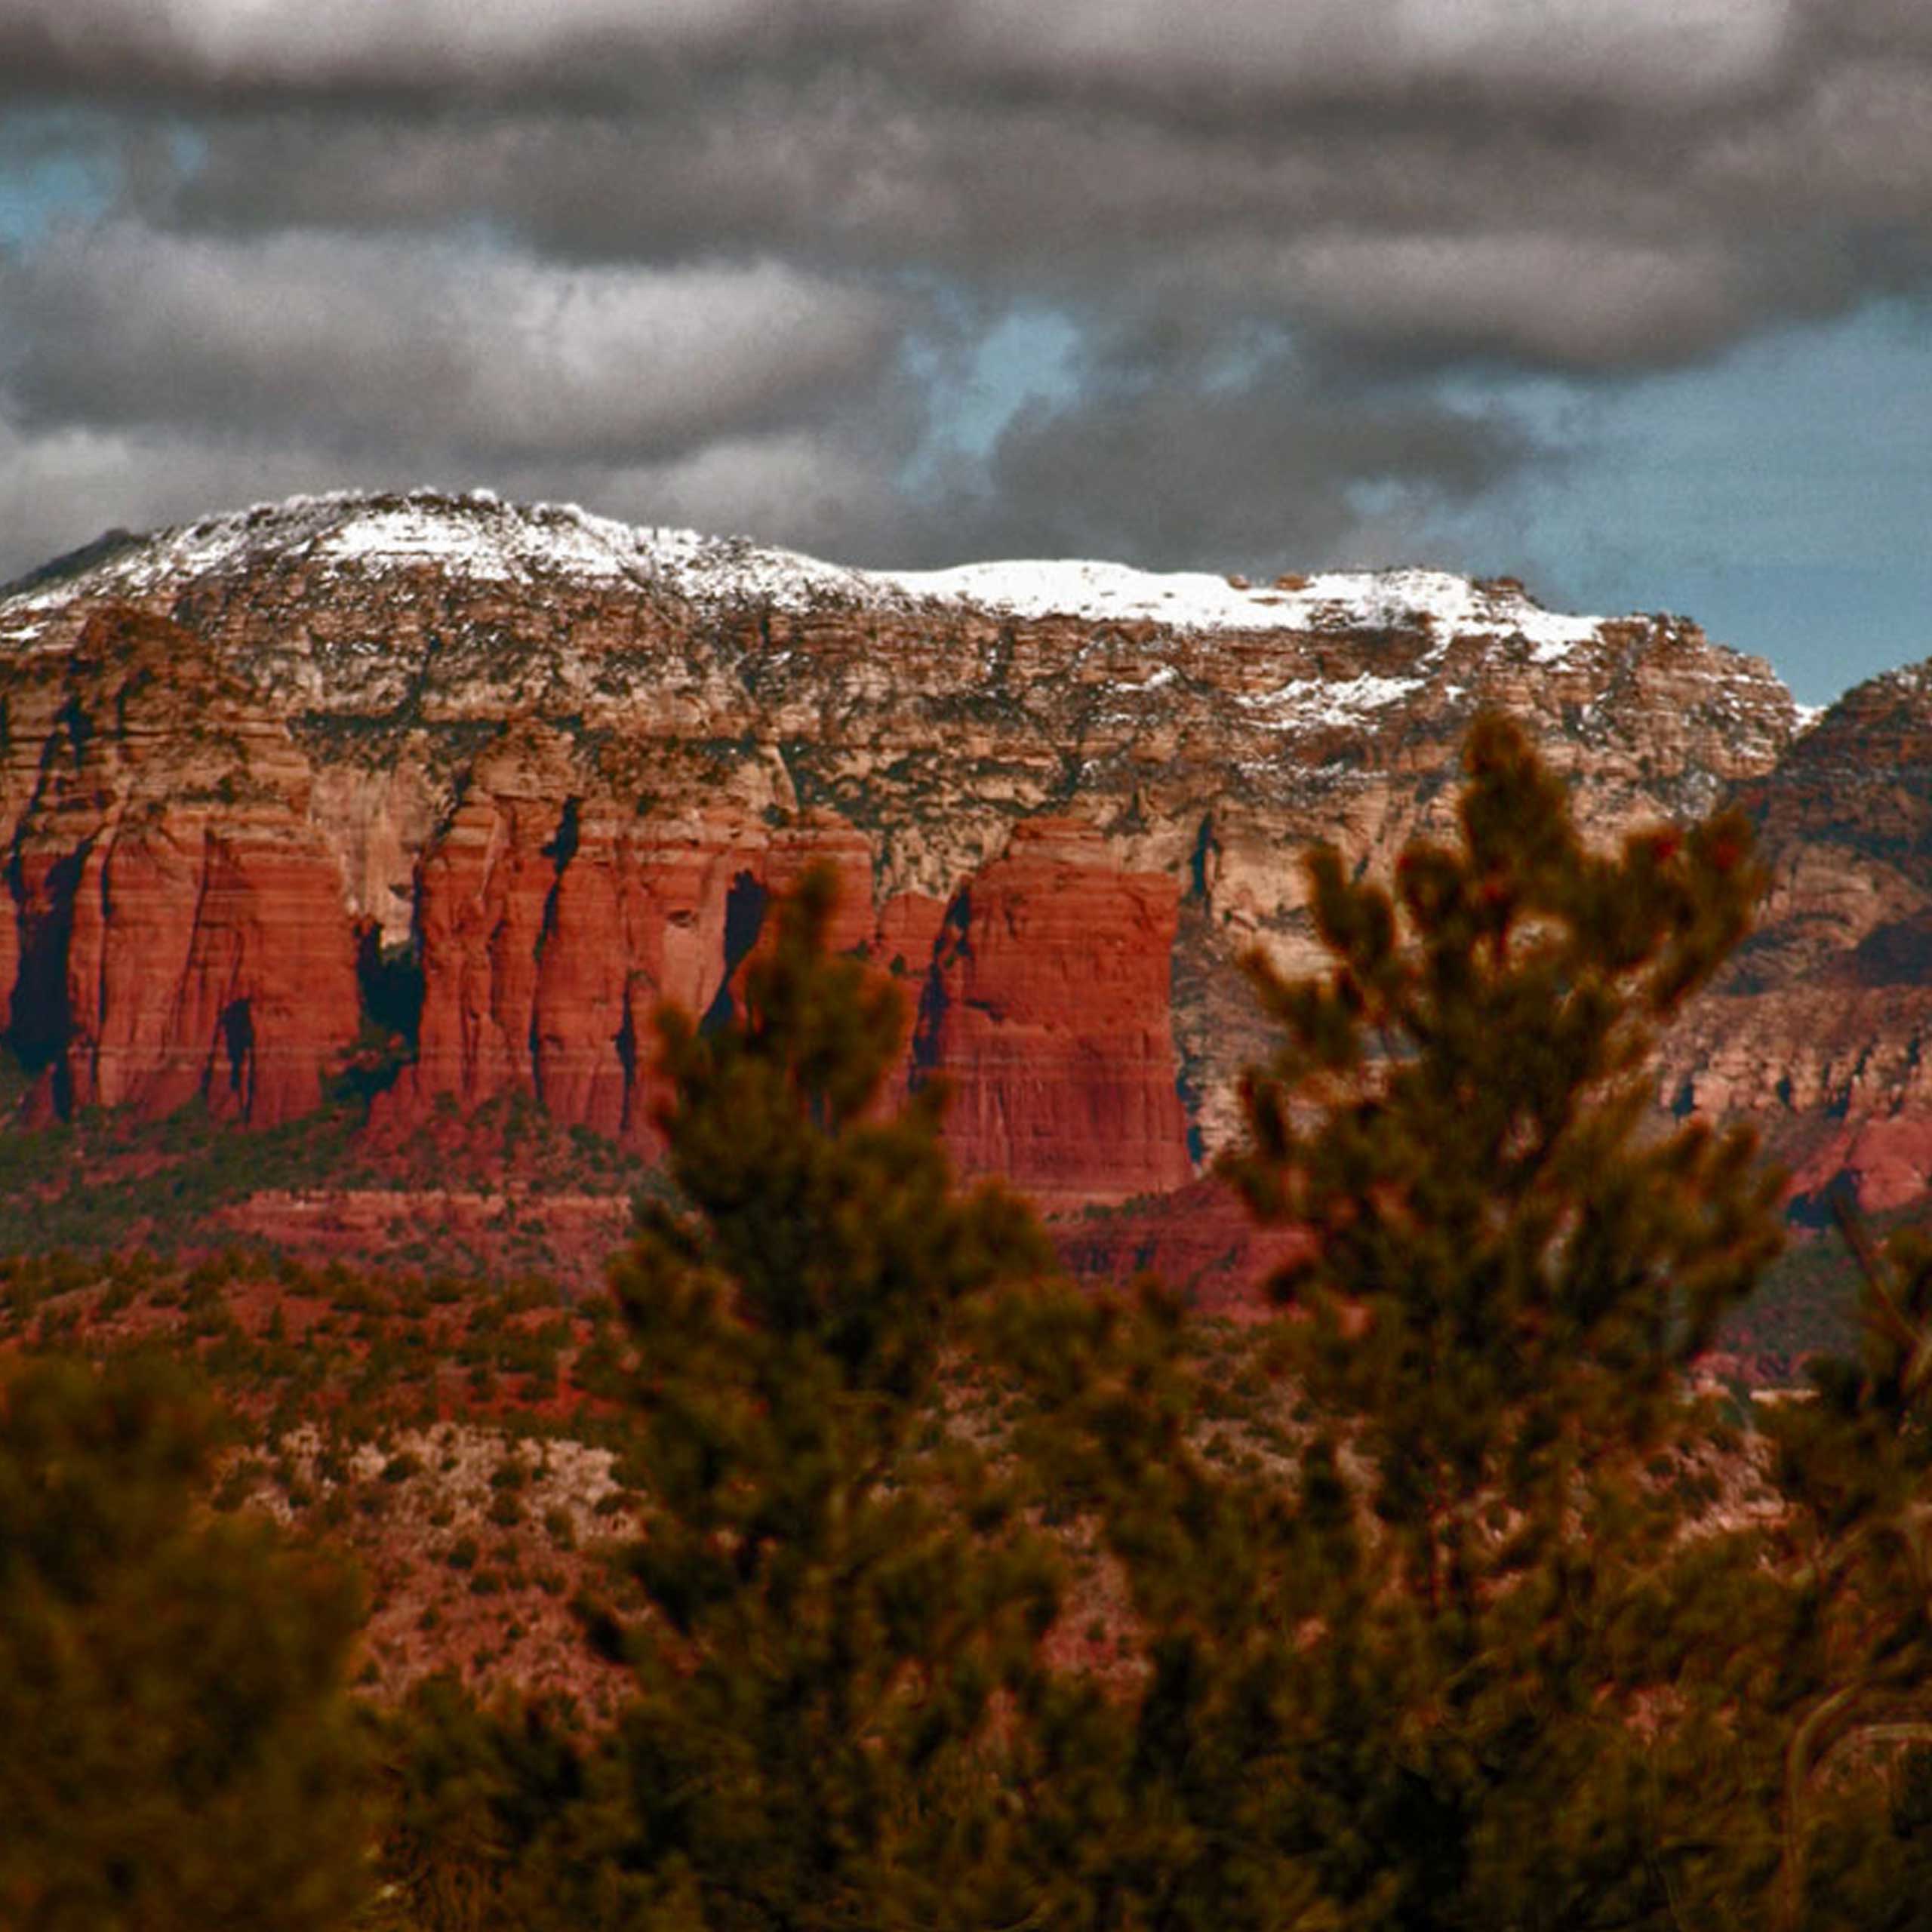 A light blanket of snow covers the distant red rock of Sedona in winter